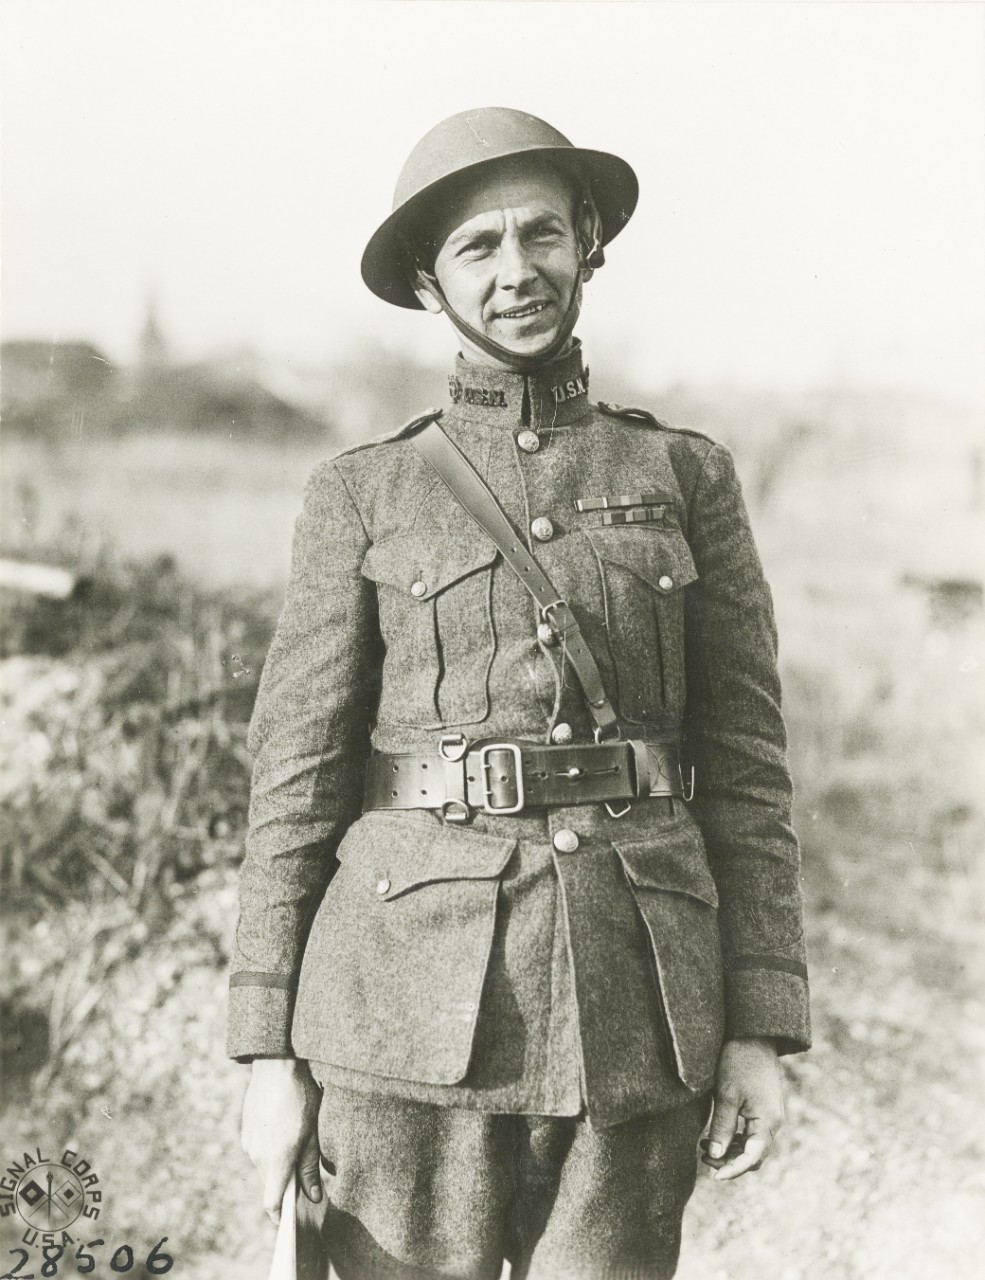 111-SC-28506: Lieutenant R. Savin, U.S. Navy Railway Battery, Thierville, Muese, France. Photographed by Sergeant First Class Morris Fineberg, SC, released October 29, 1918.